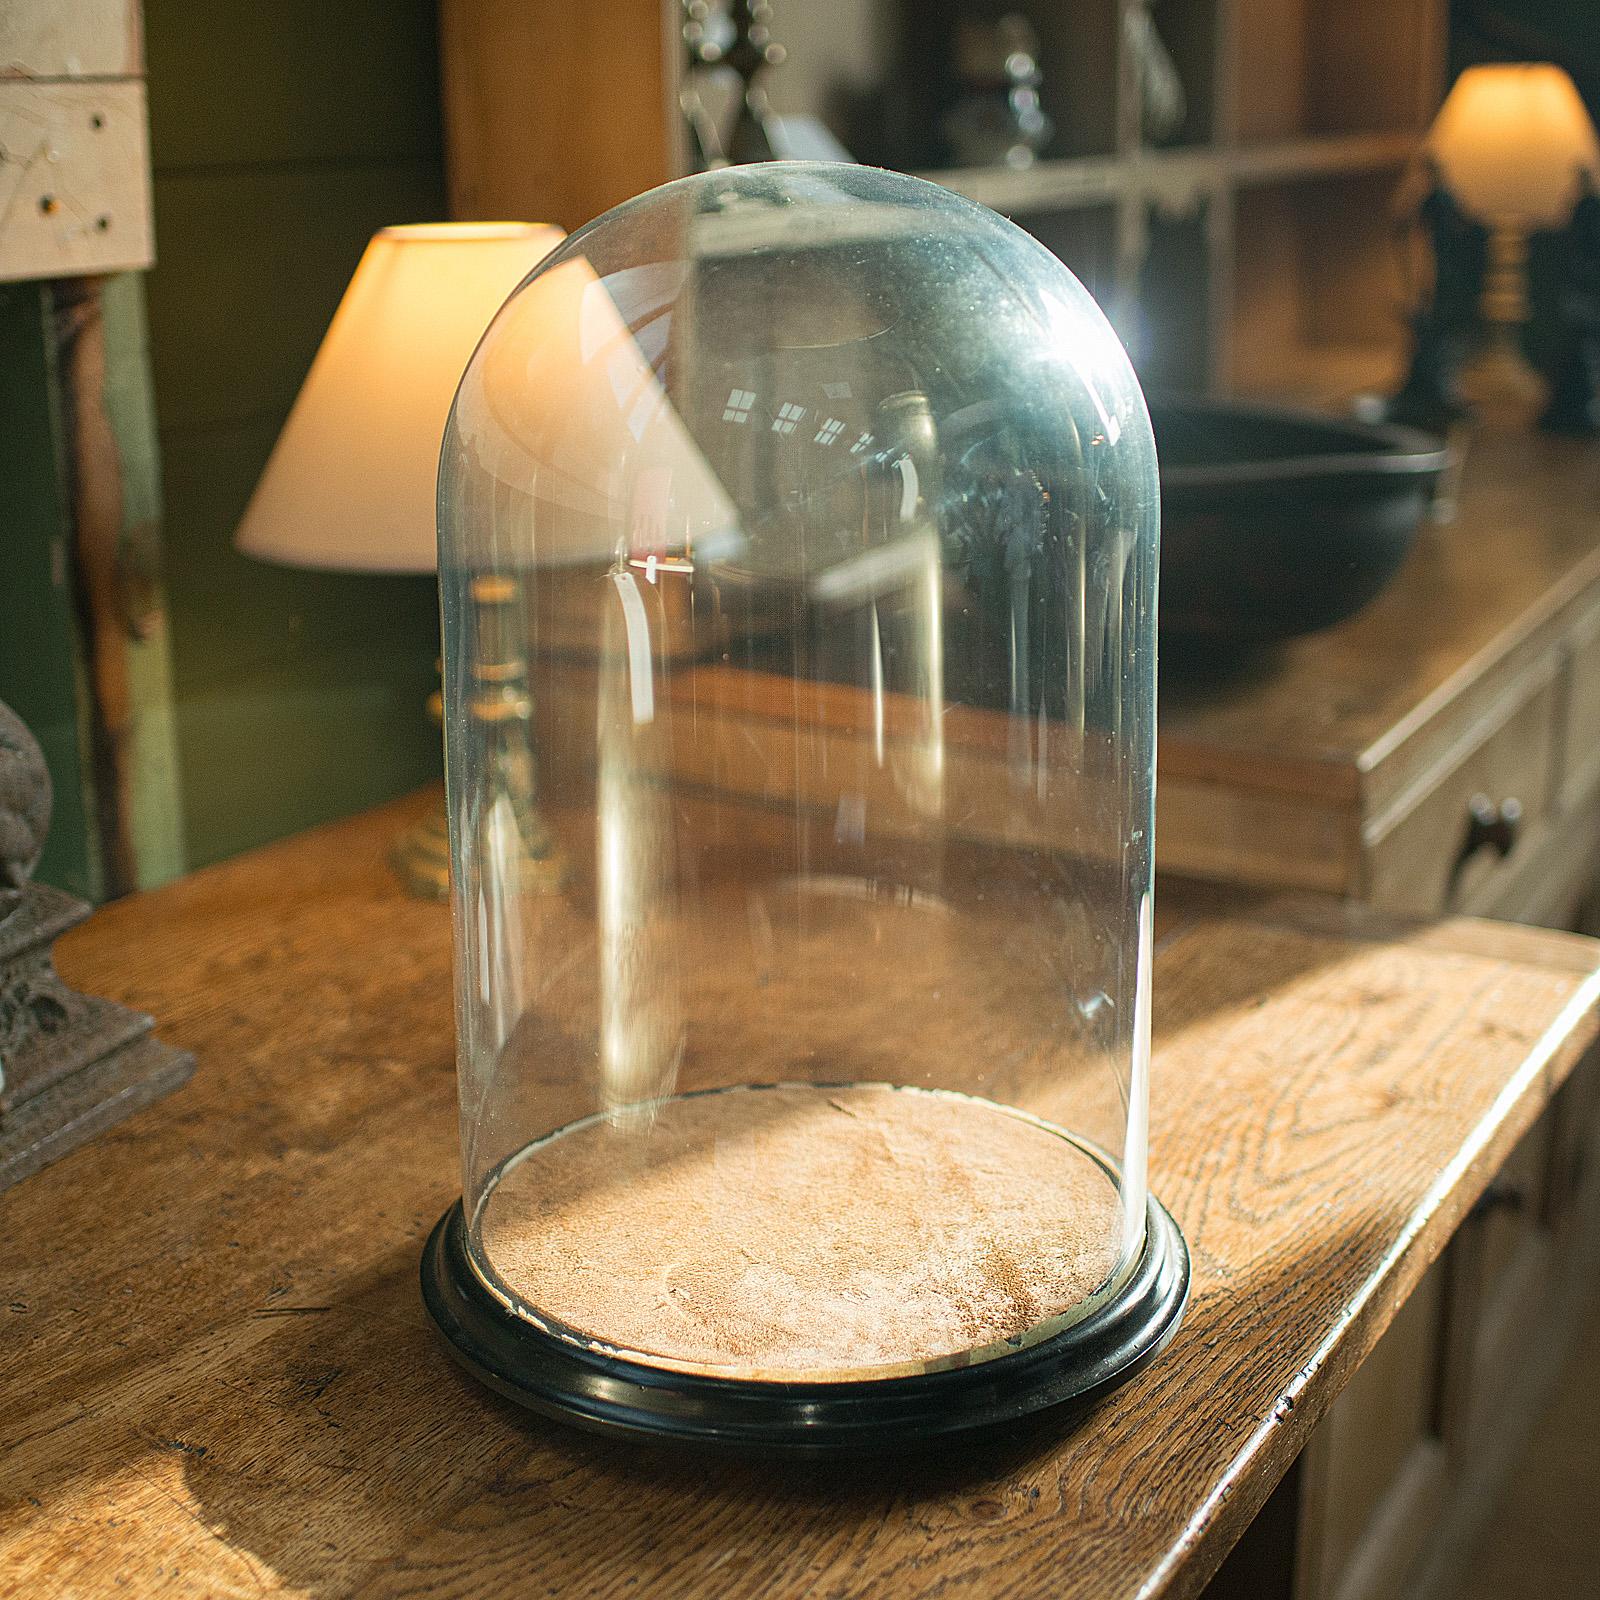 This is an antique taxidermy dome. An English, glass collectible display showcase, dating to the late Victorian period, circa 1880.

Quality and generously sized display dome
Displays a desirable aged patina throughout
Glass dome in fine condition